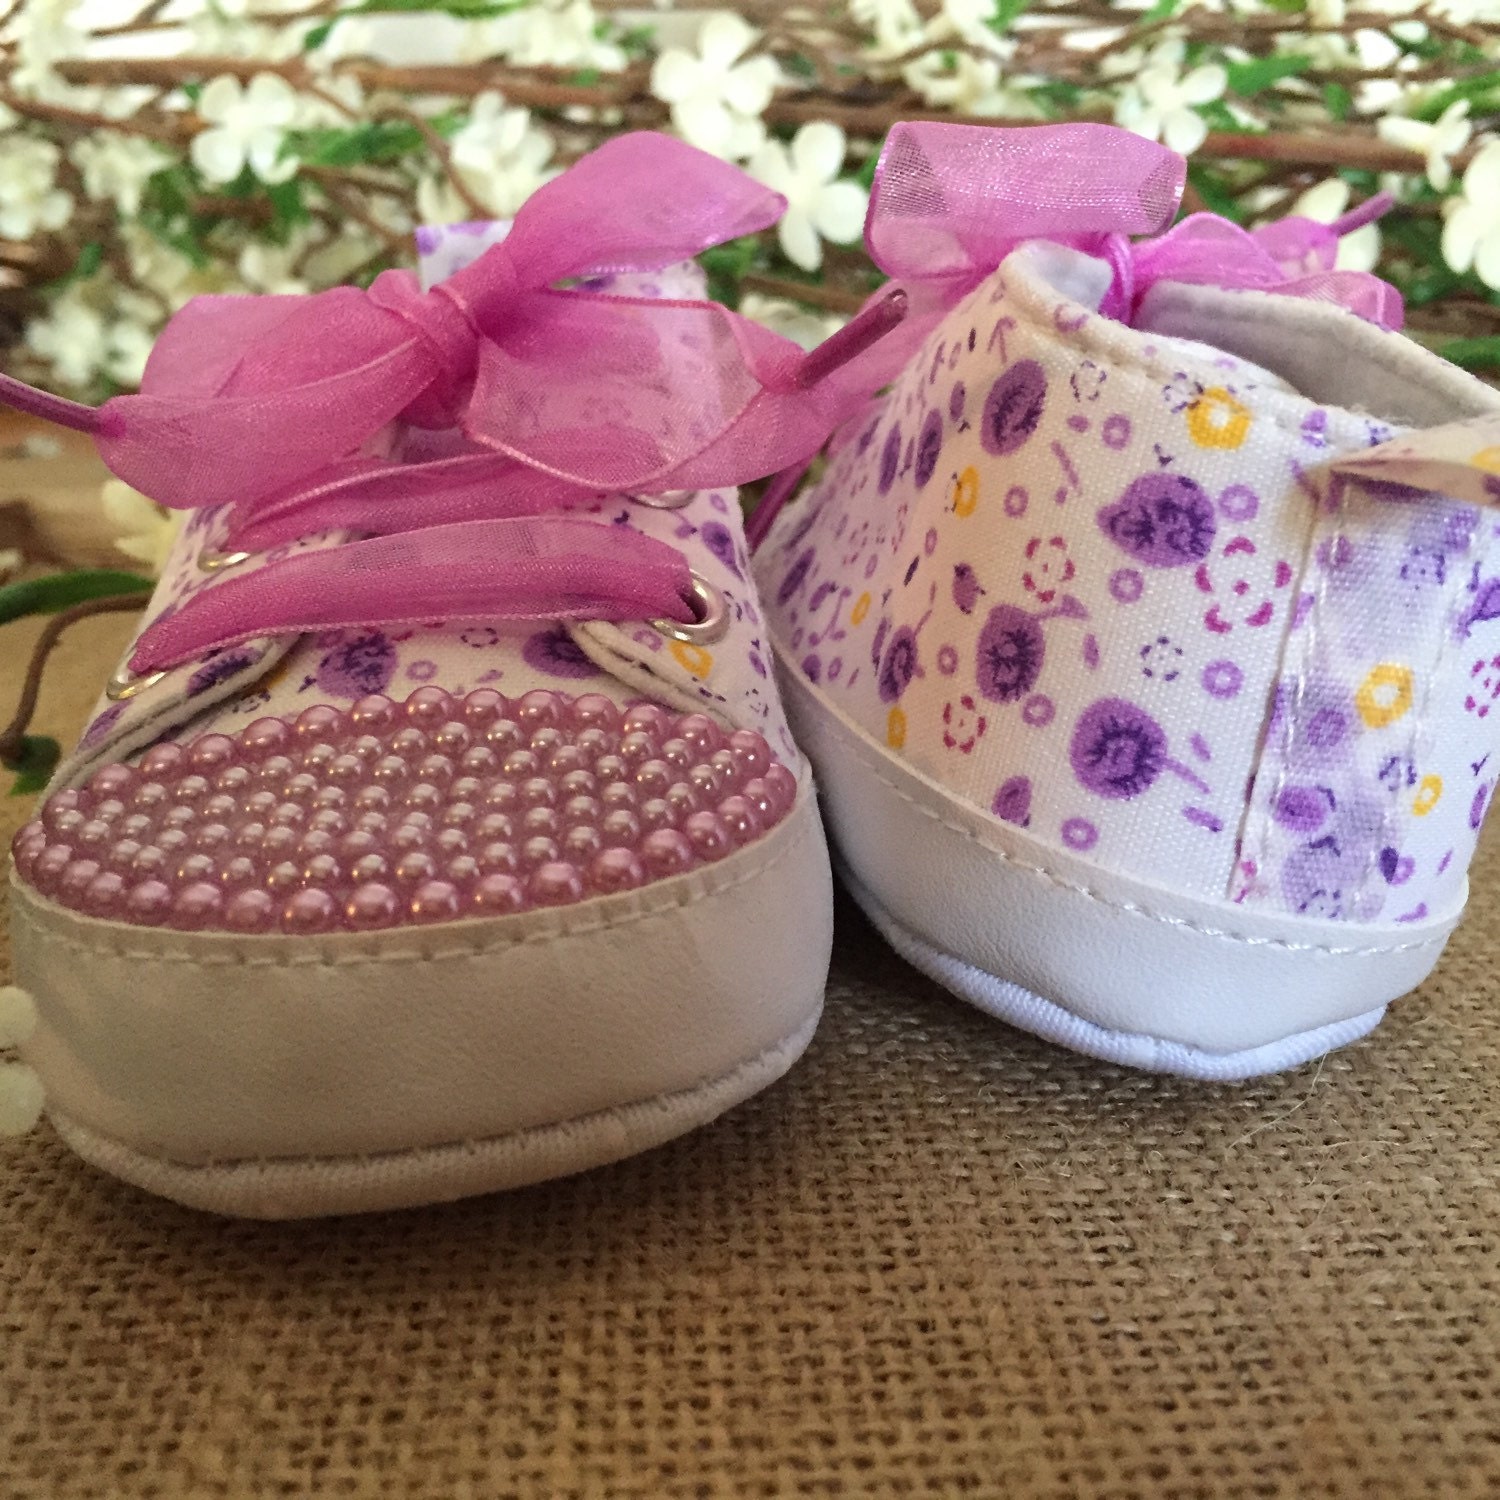 Purple baby girl shoes. Size 5 baby shoes. 4.5 inches long.